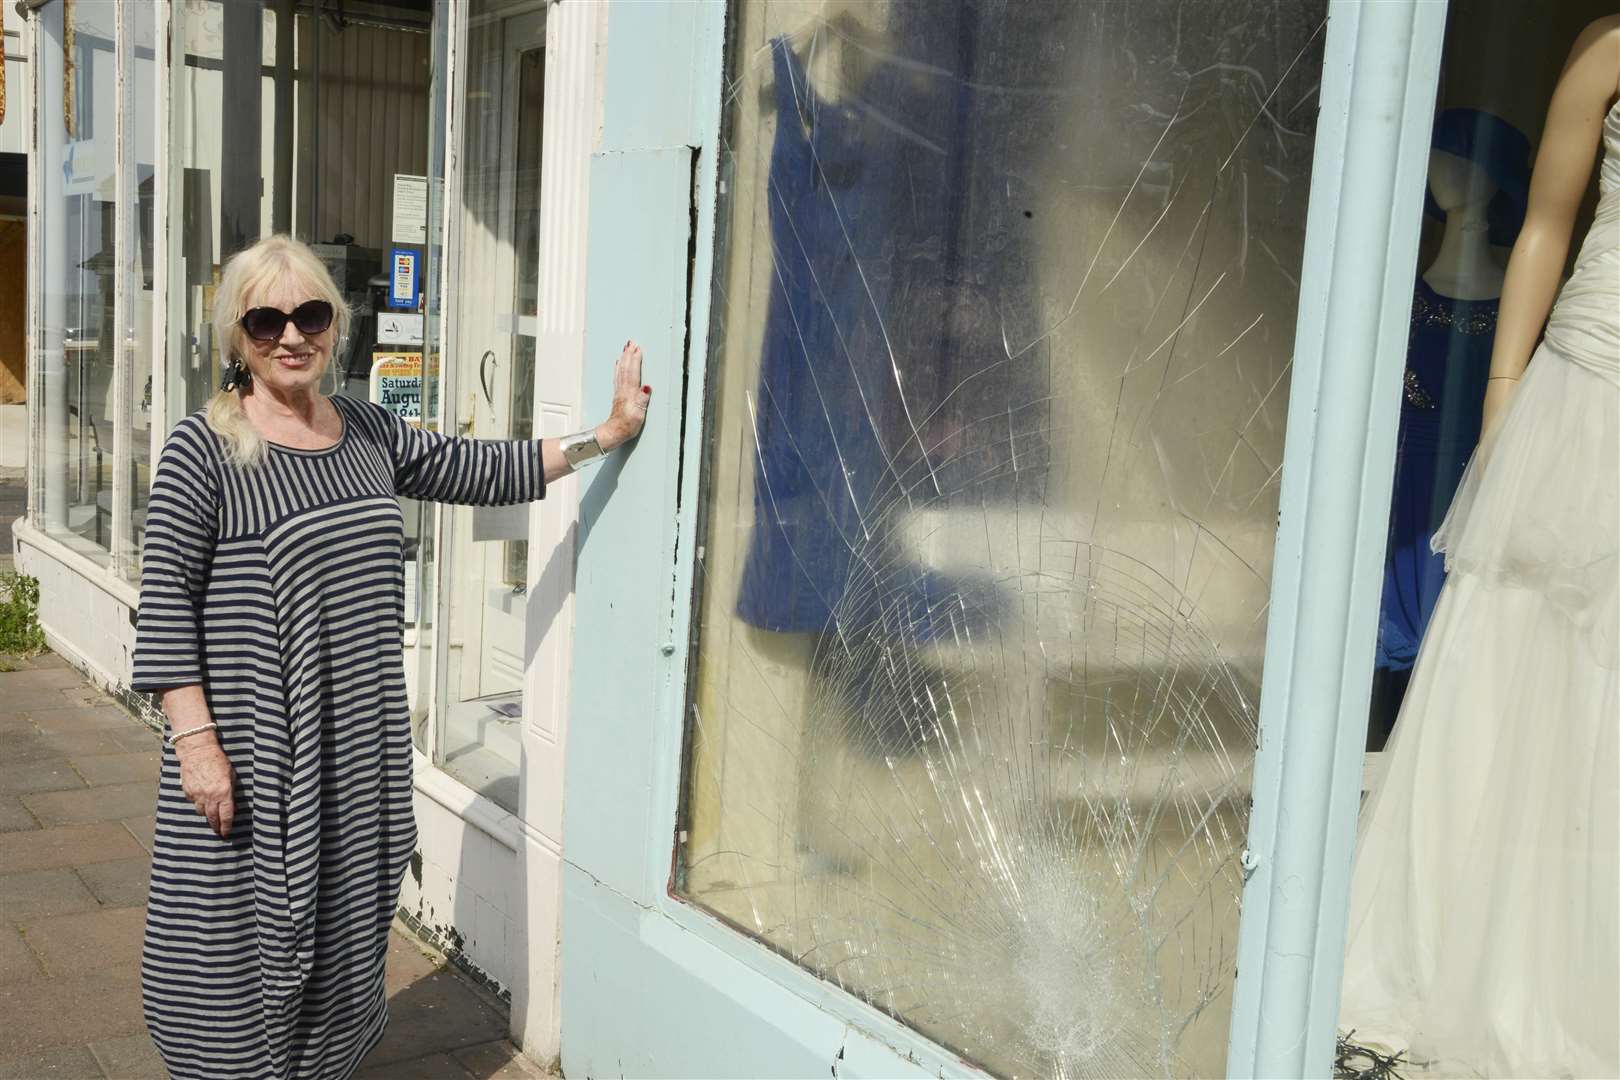 Linda Cameron called for action after her shop, Maison Classique Emporium, was targeted by vandals